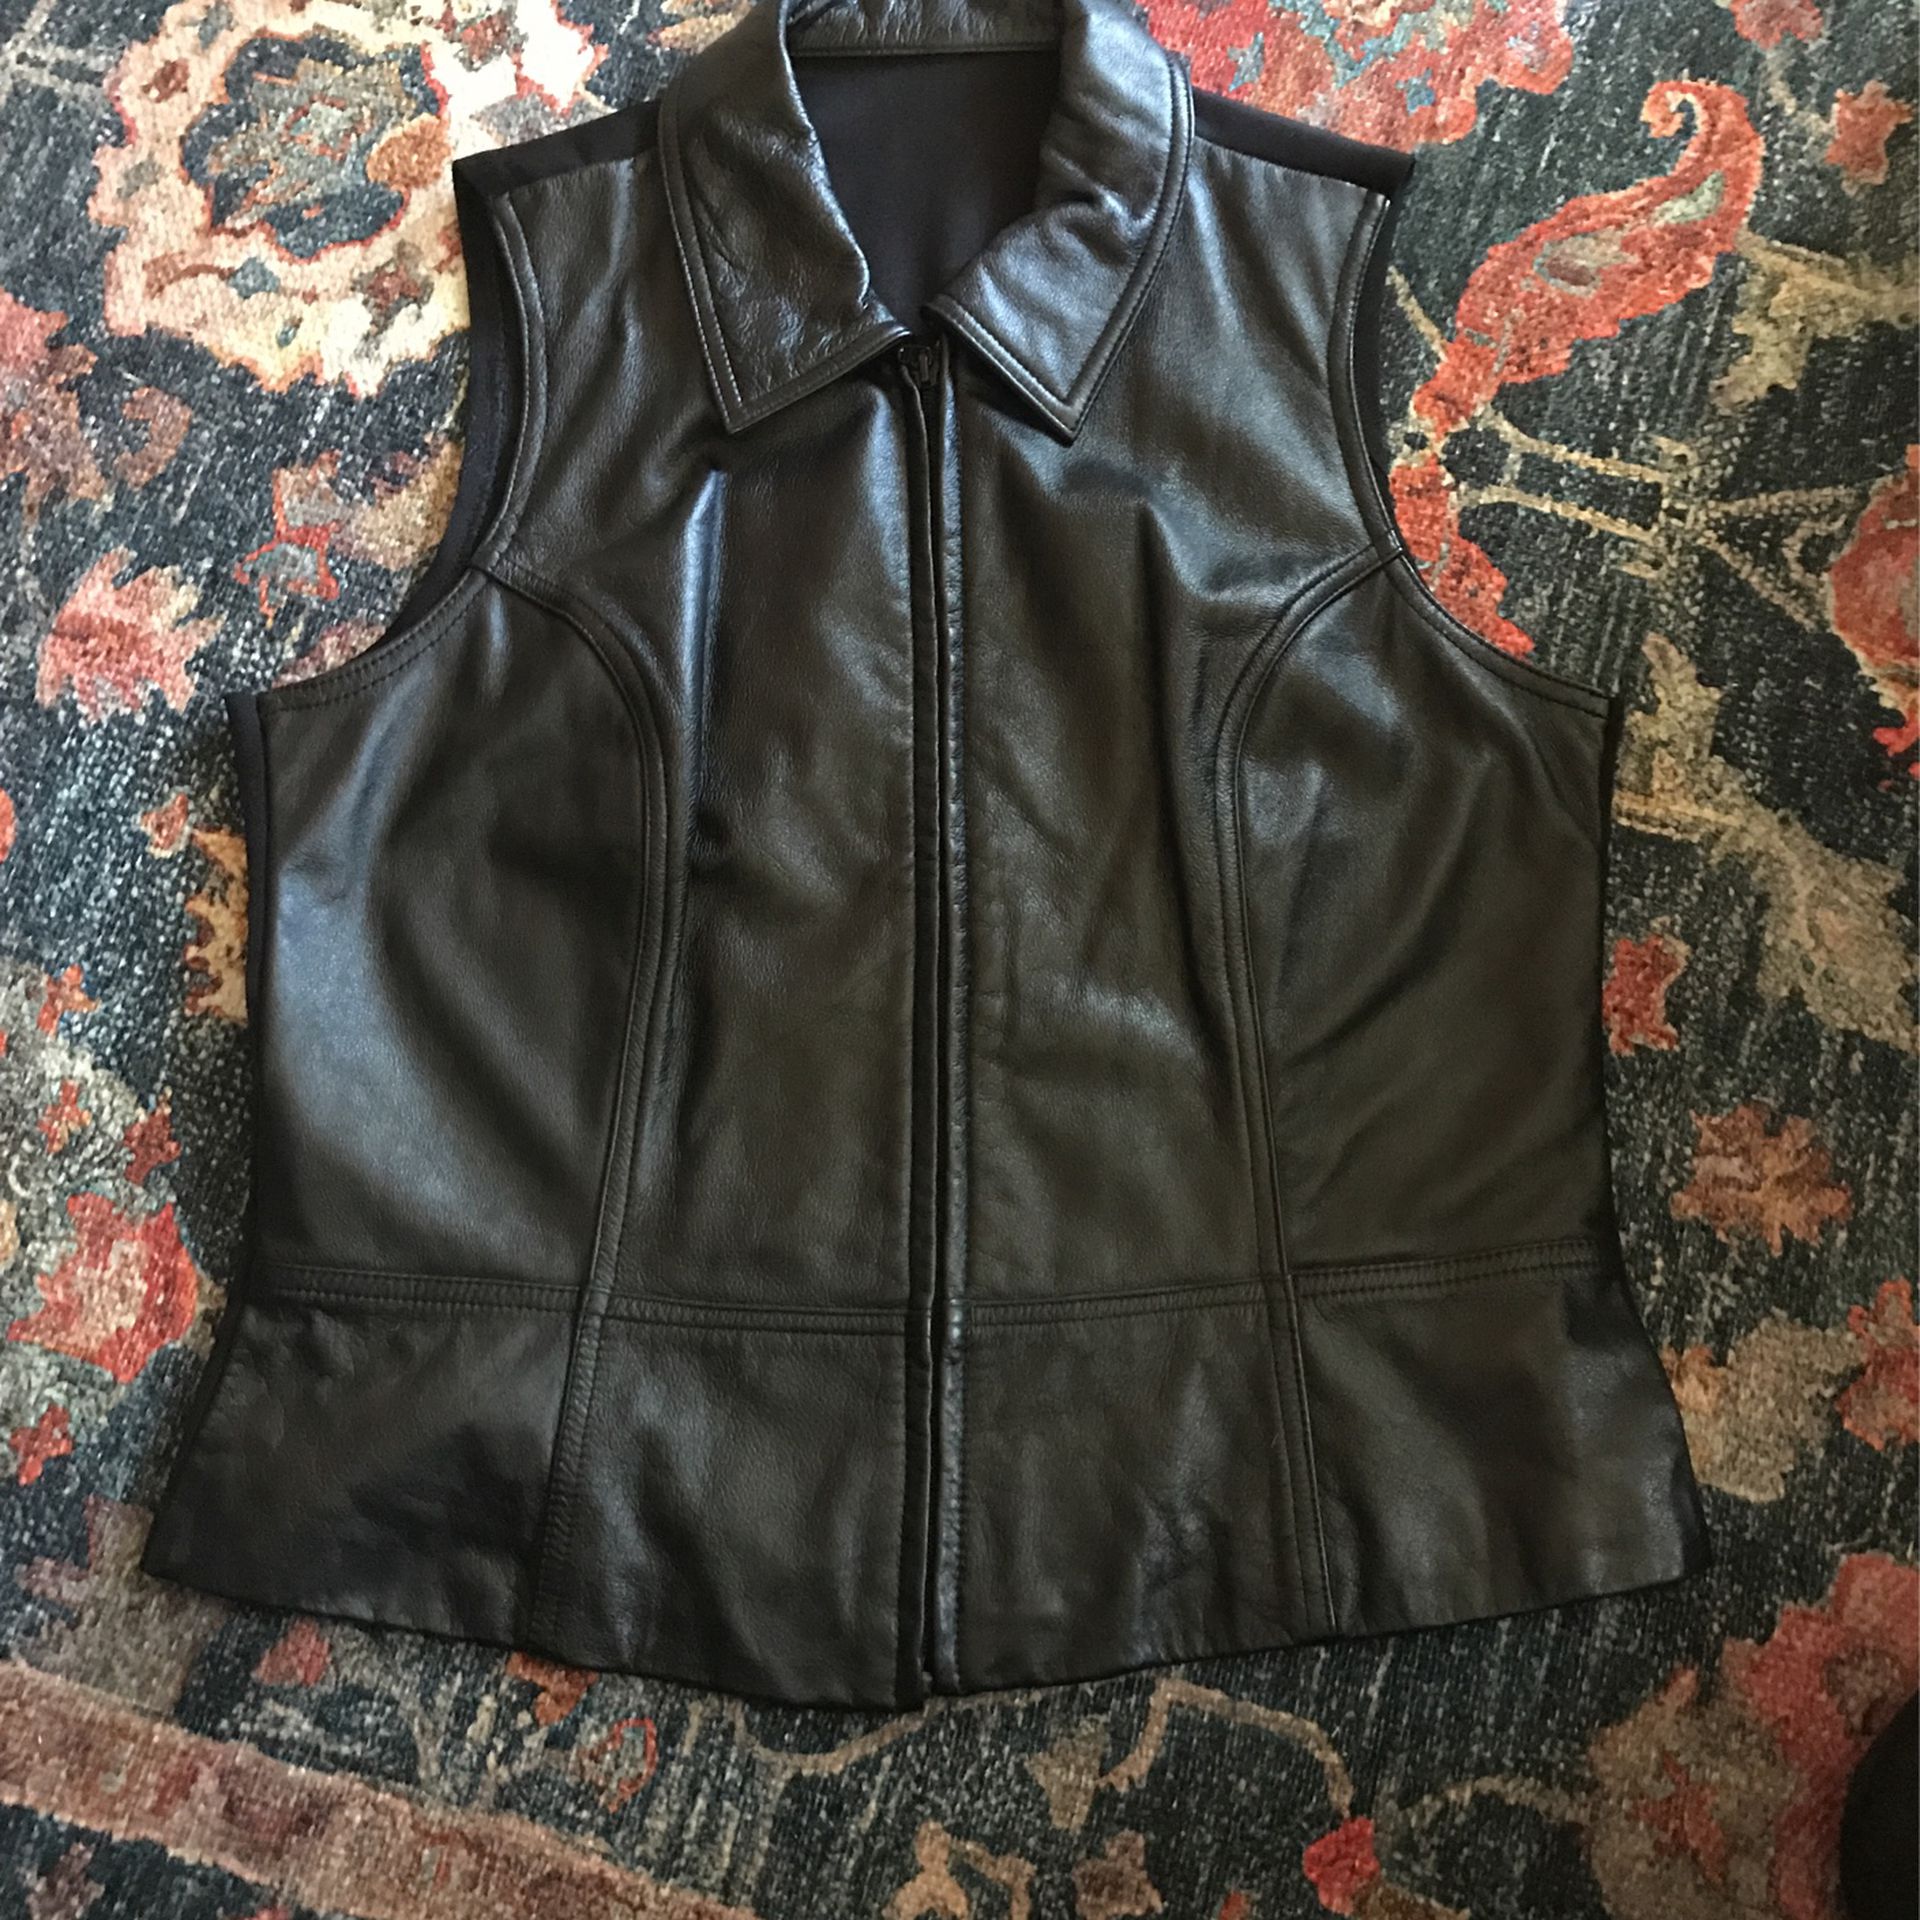 100% Leather Jacket High Quality 